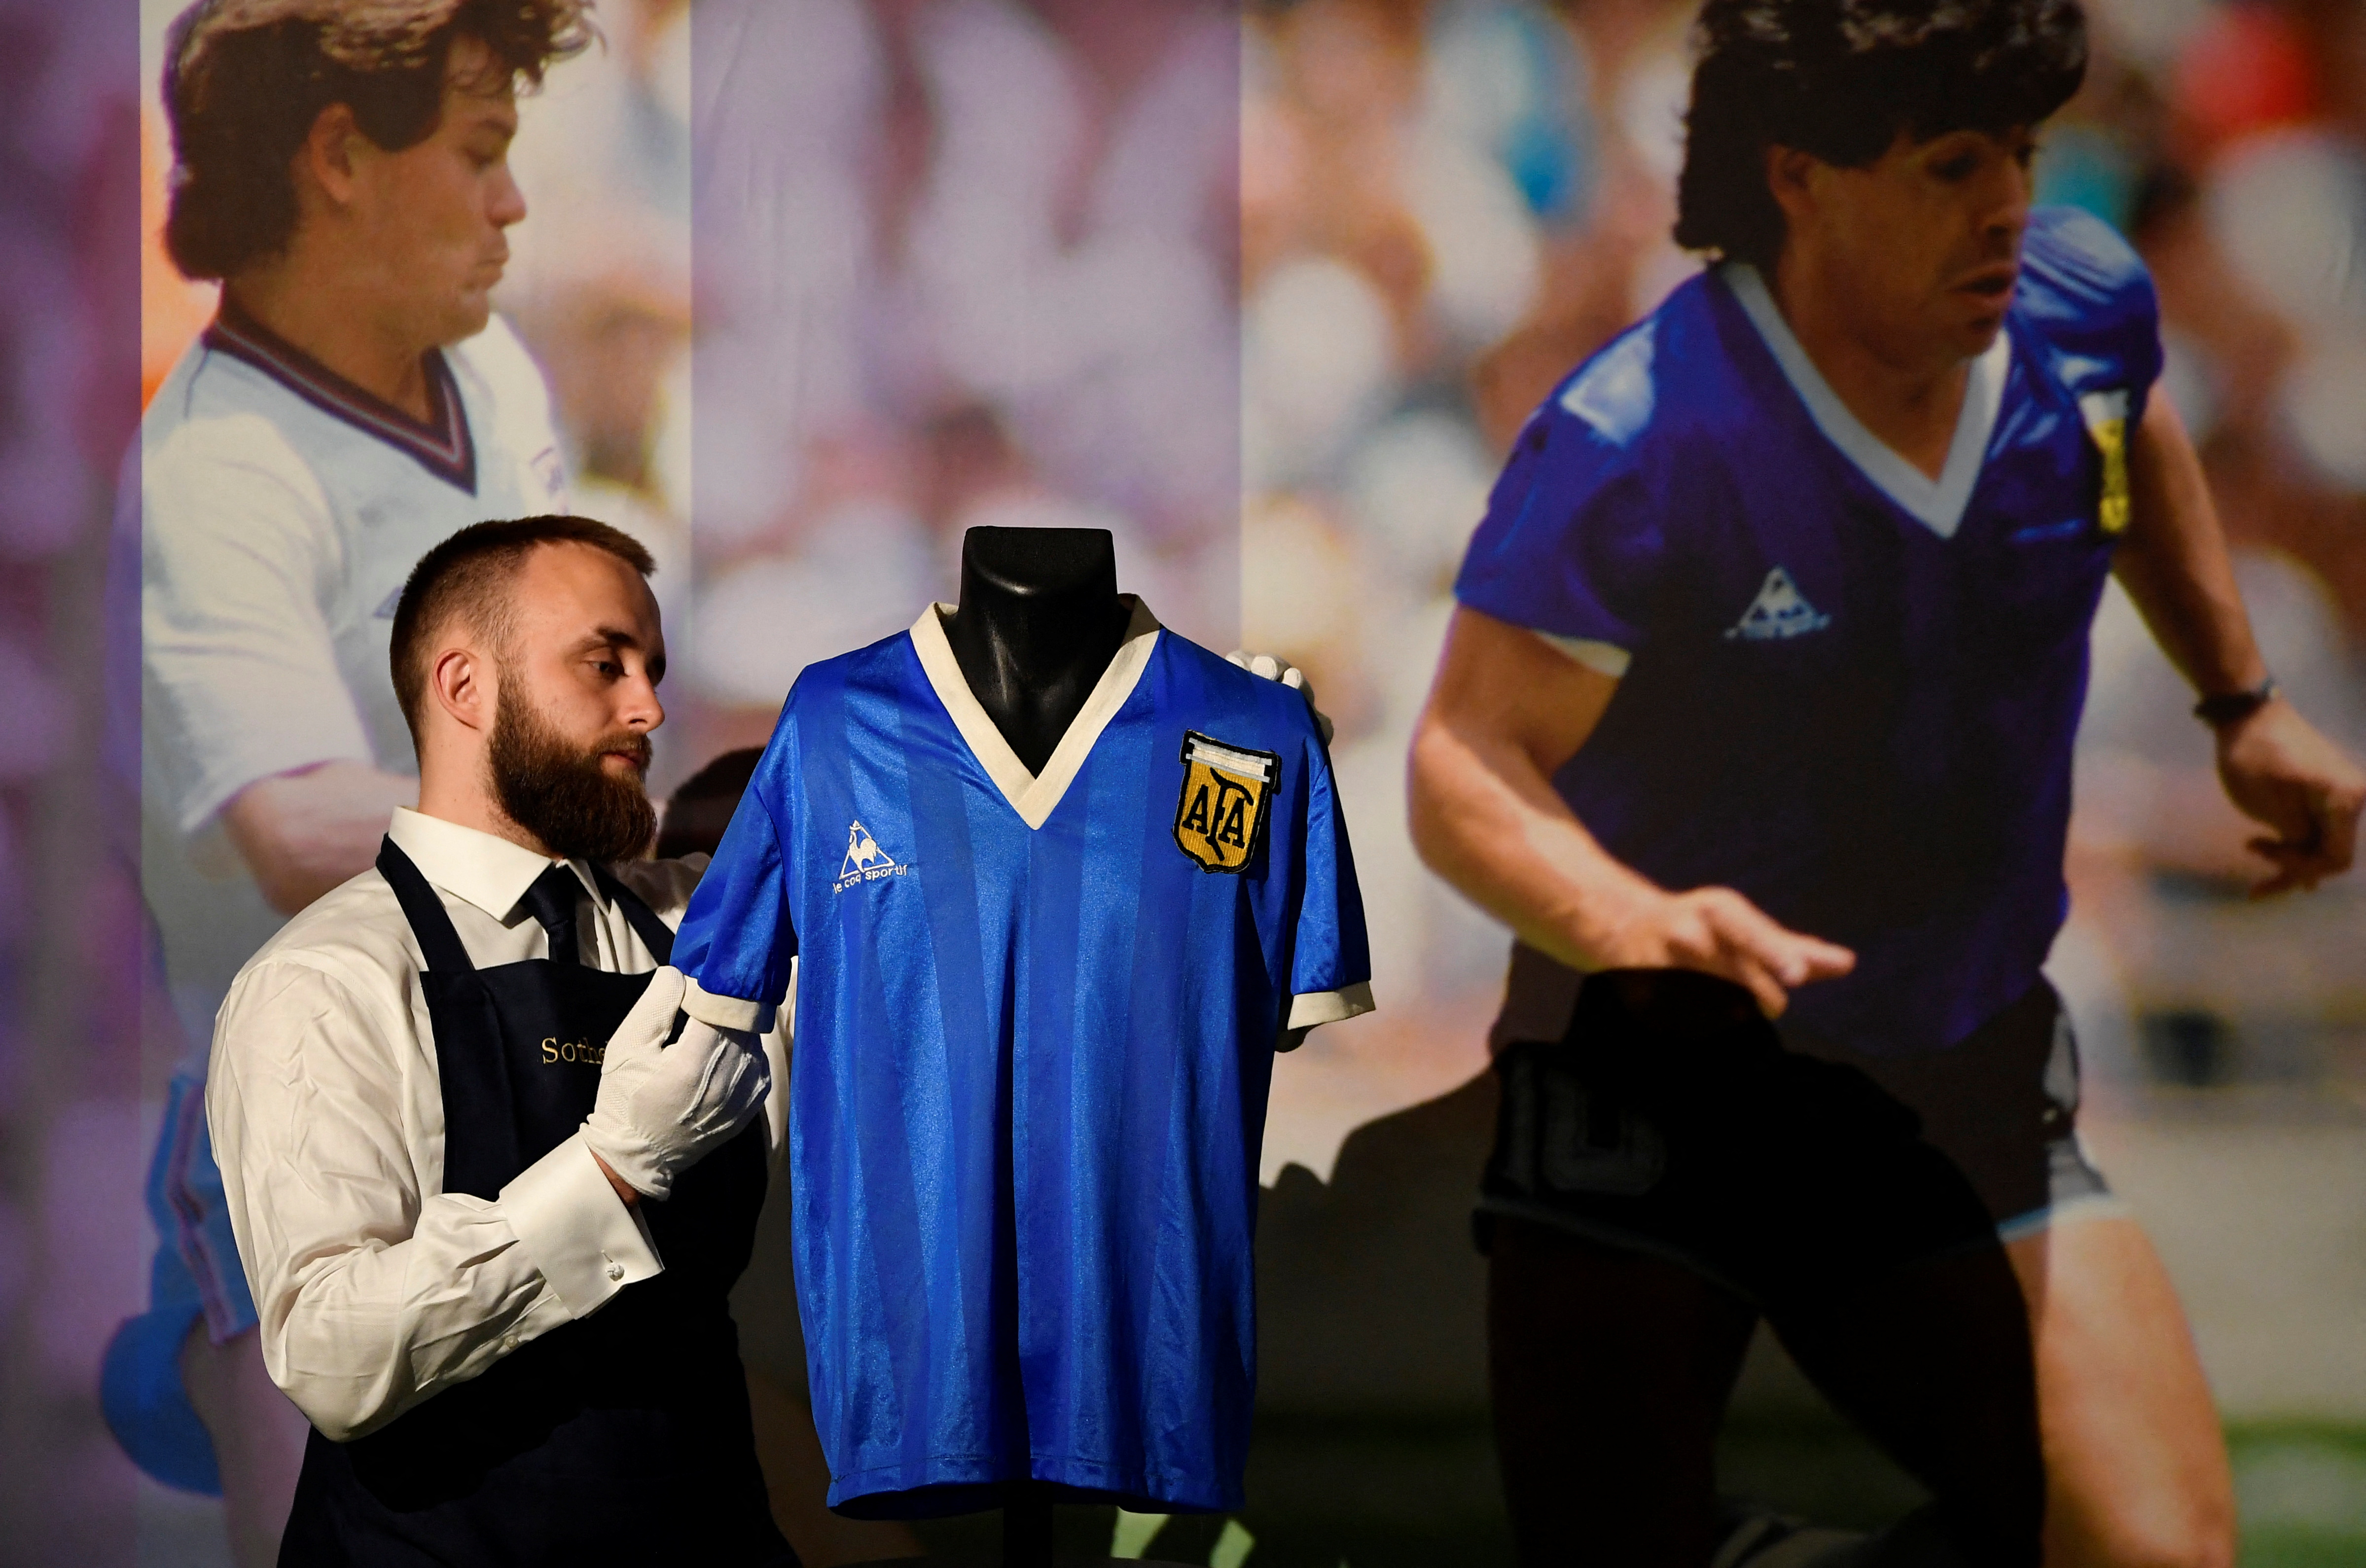 The shirt he exchanged with Steve Hodge, when it was displayed during the auction (REUTERS / Toby Melville)